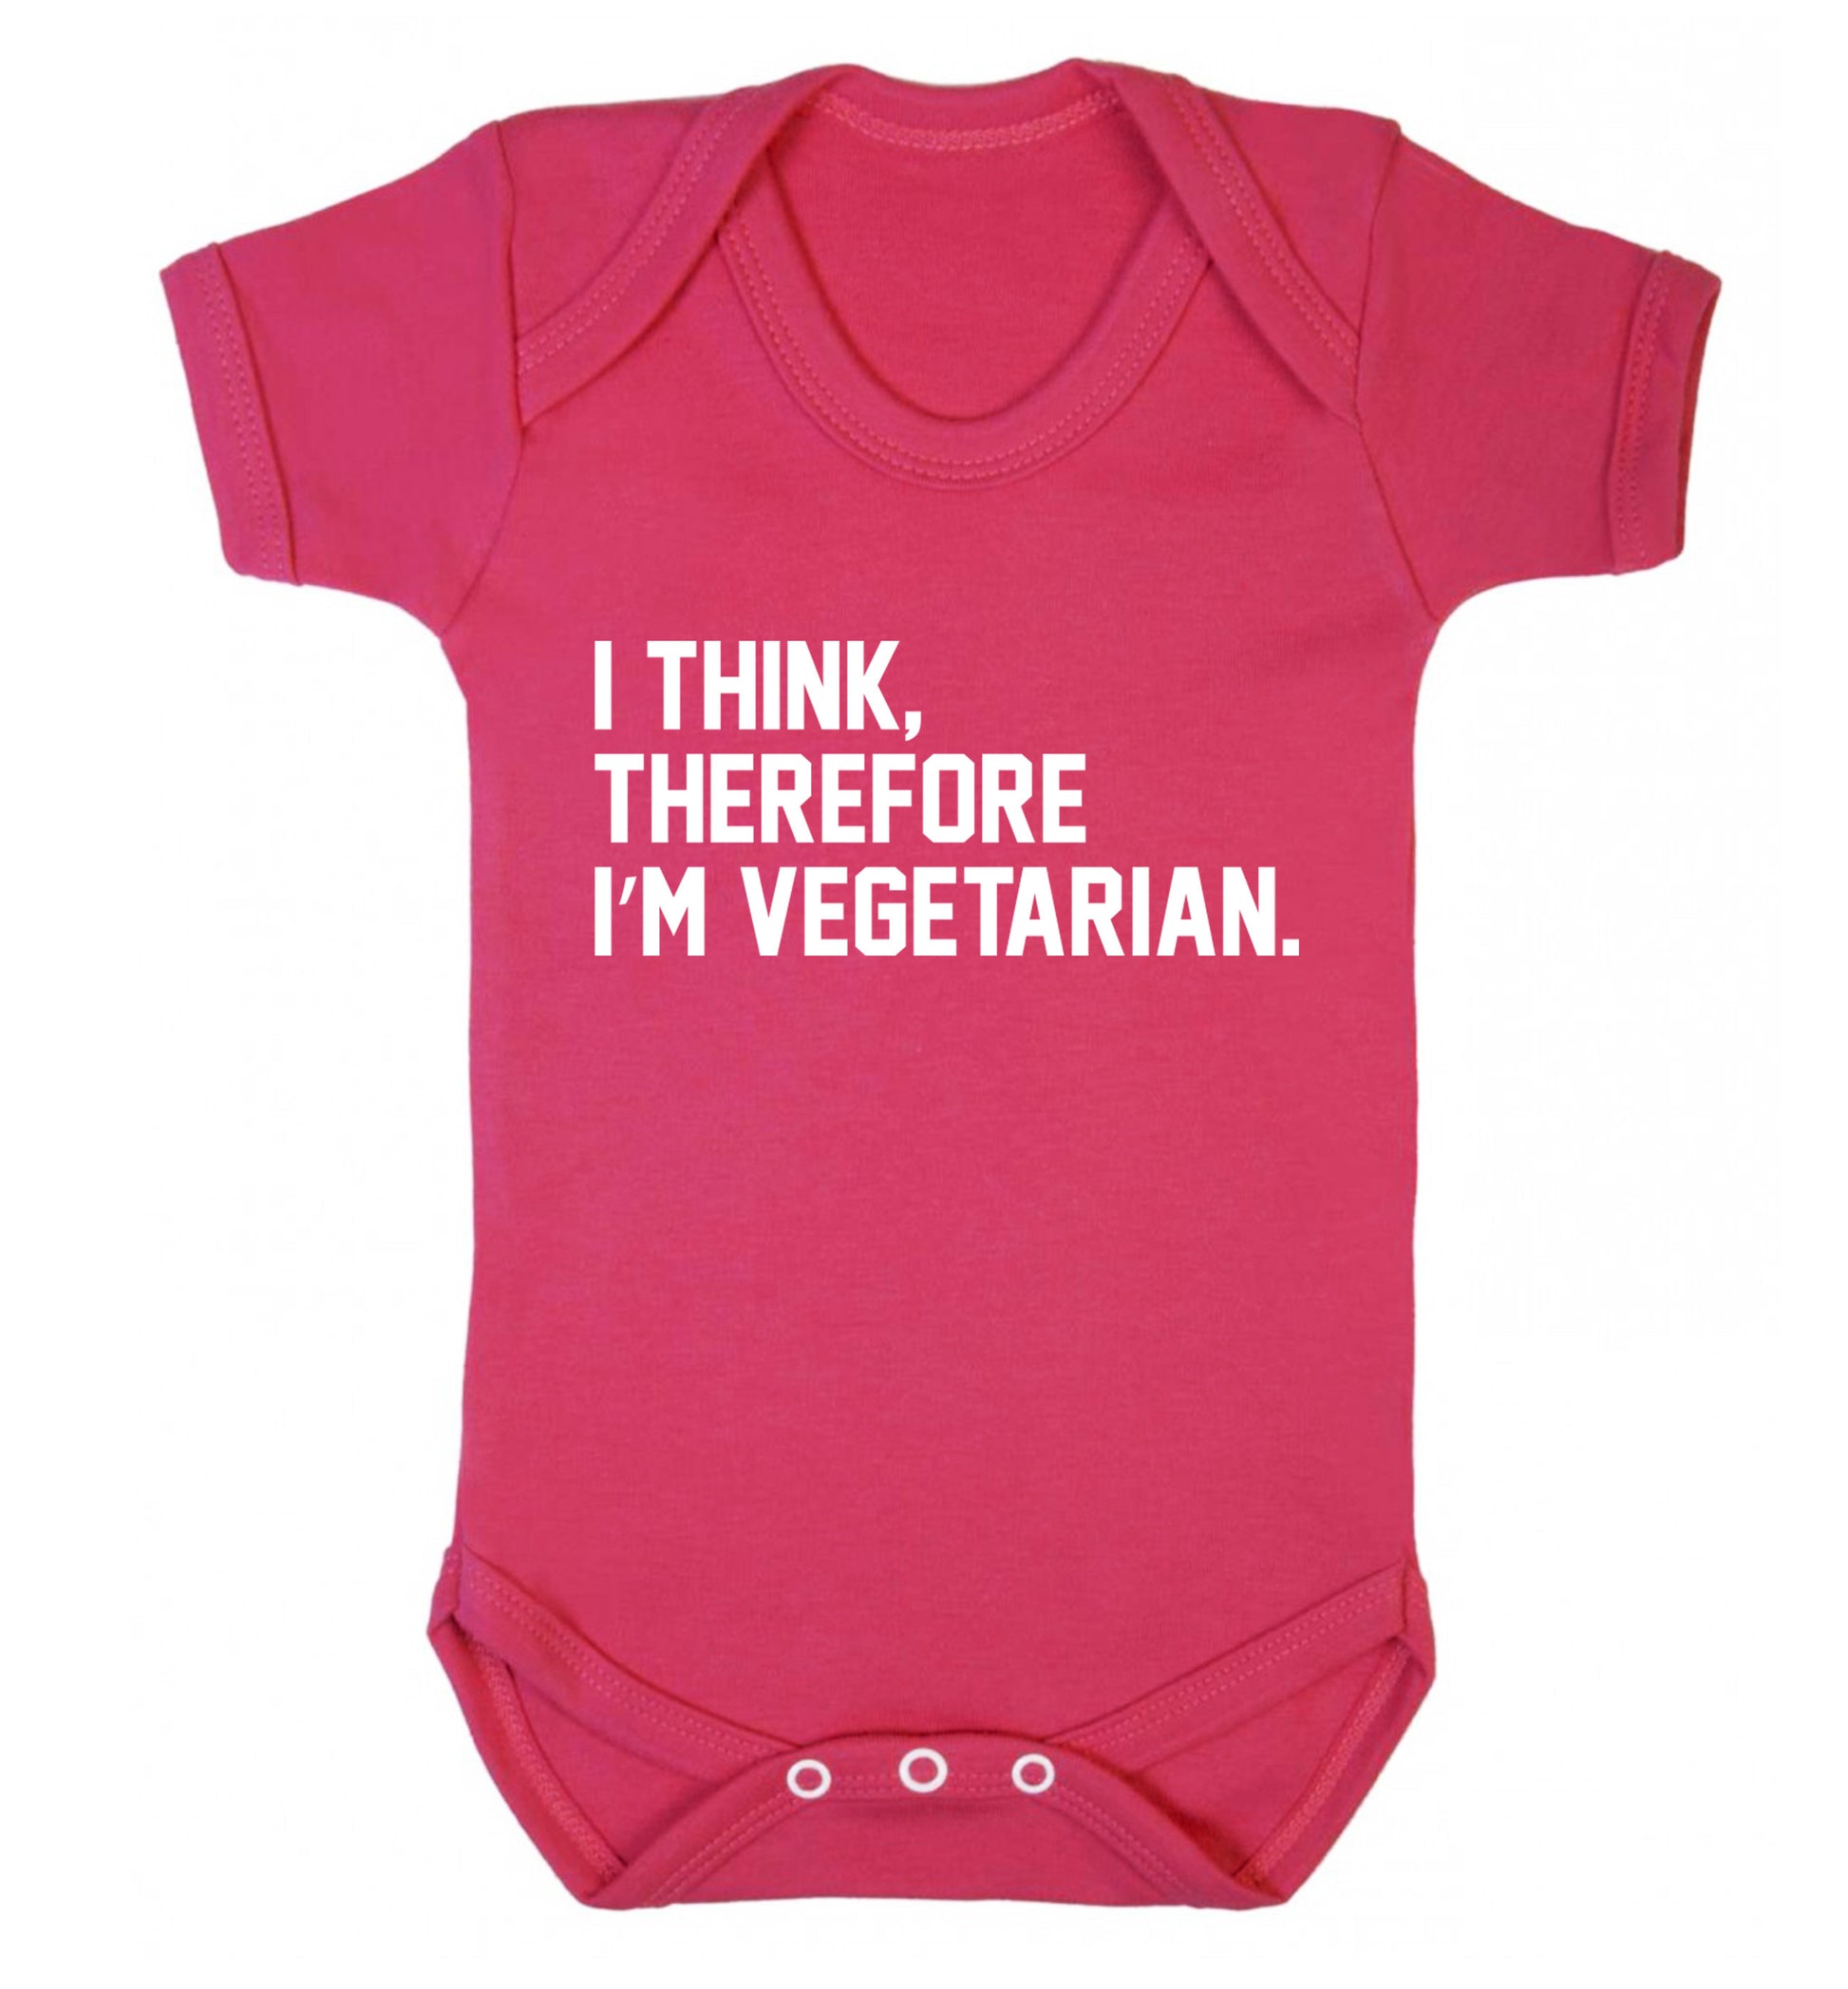 I think therefore I'm vegetarian Baby Vest dark pink 18-24 months